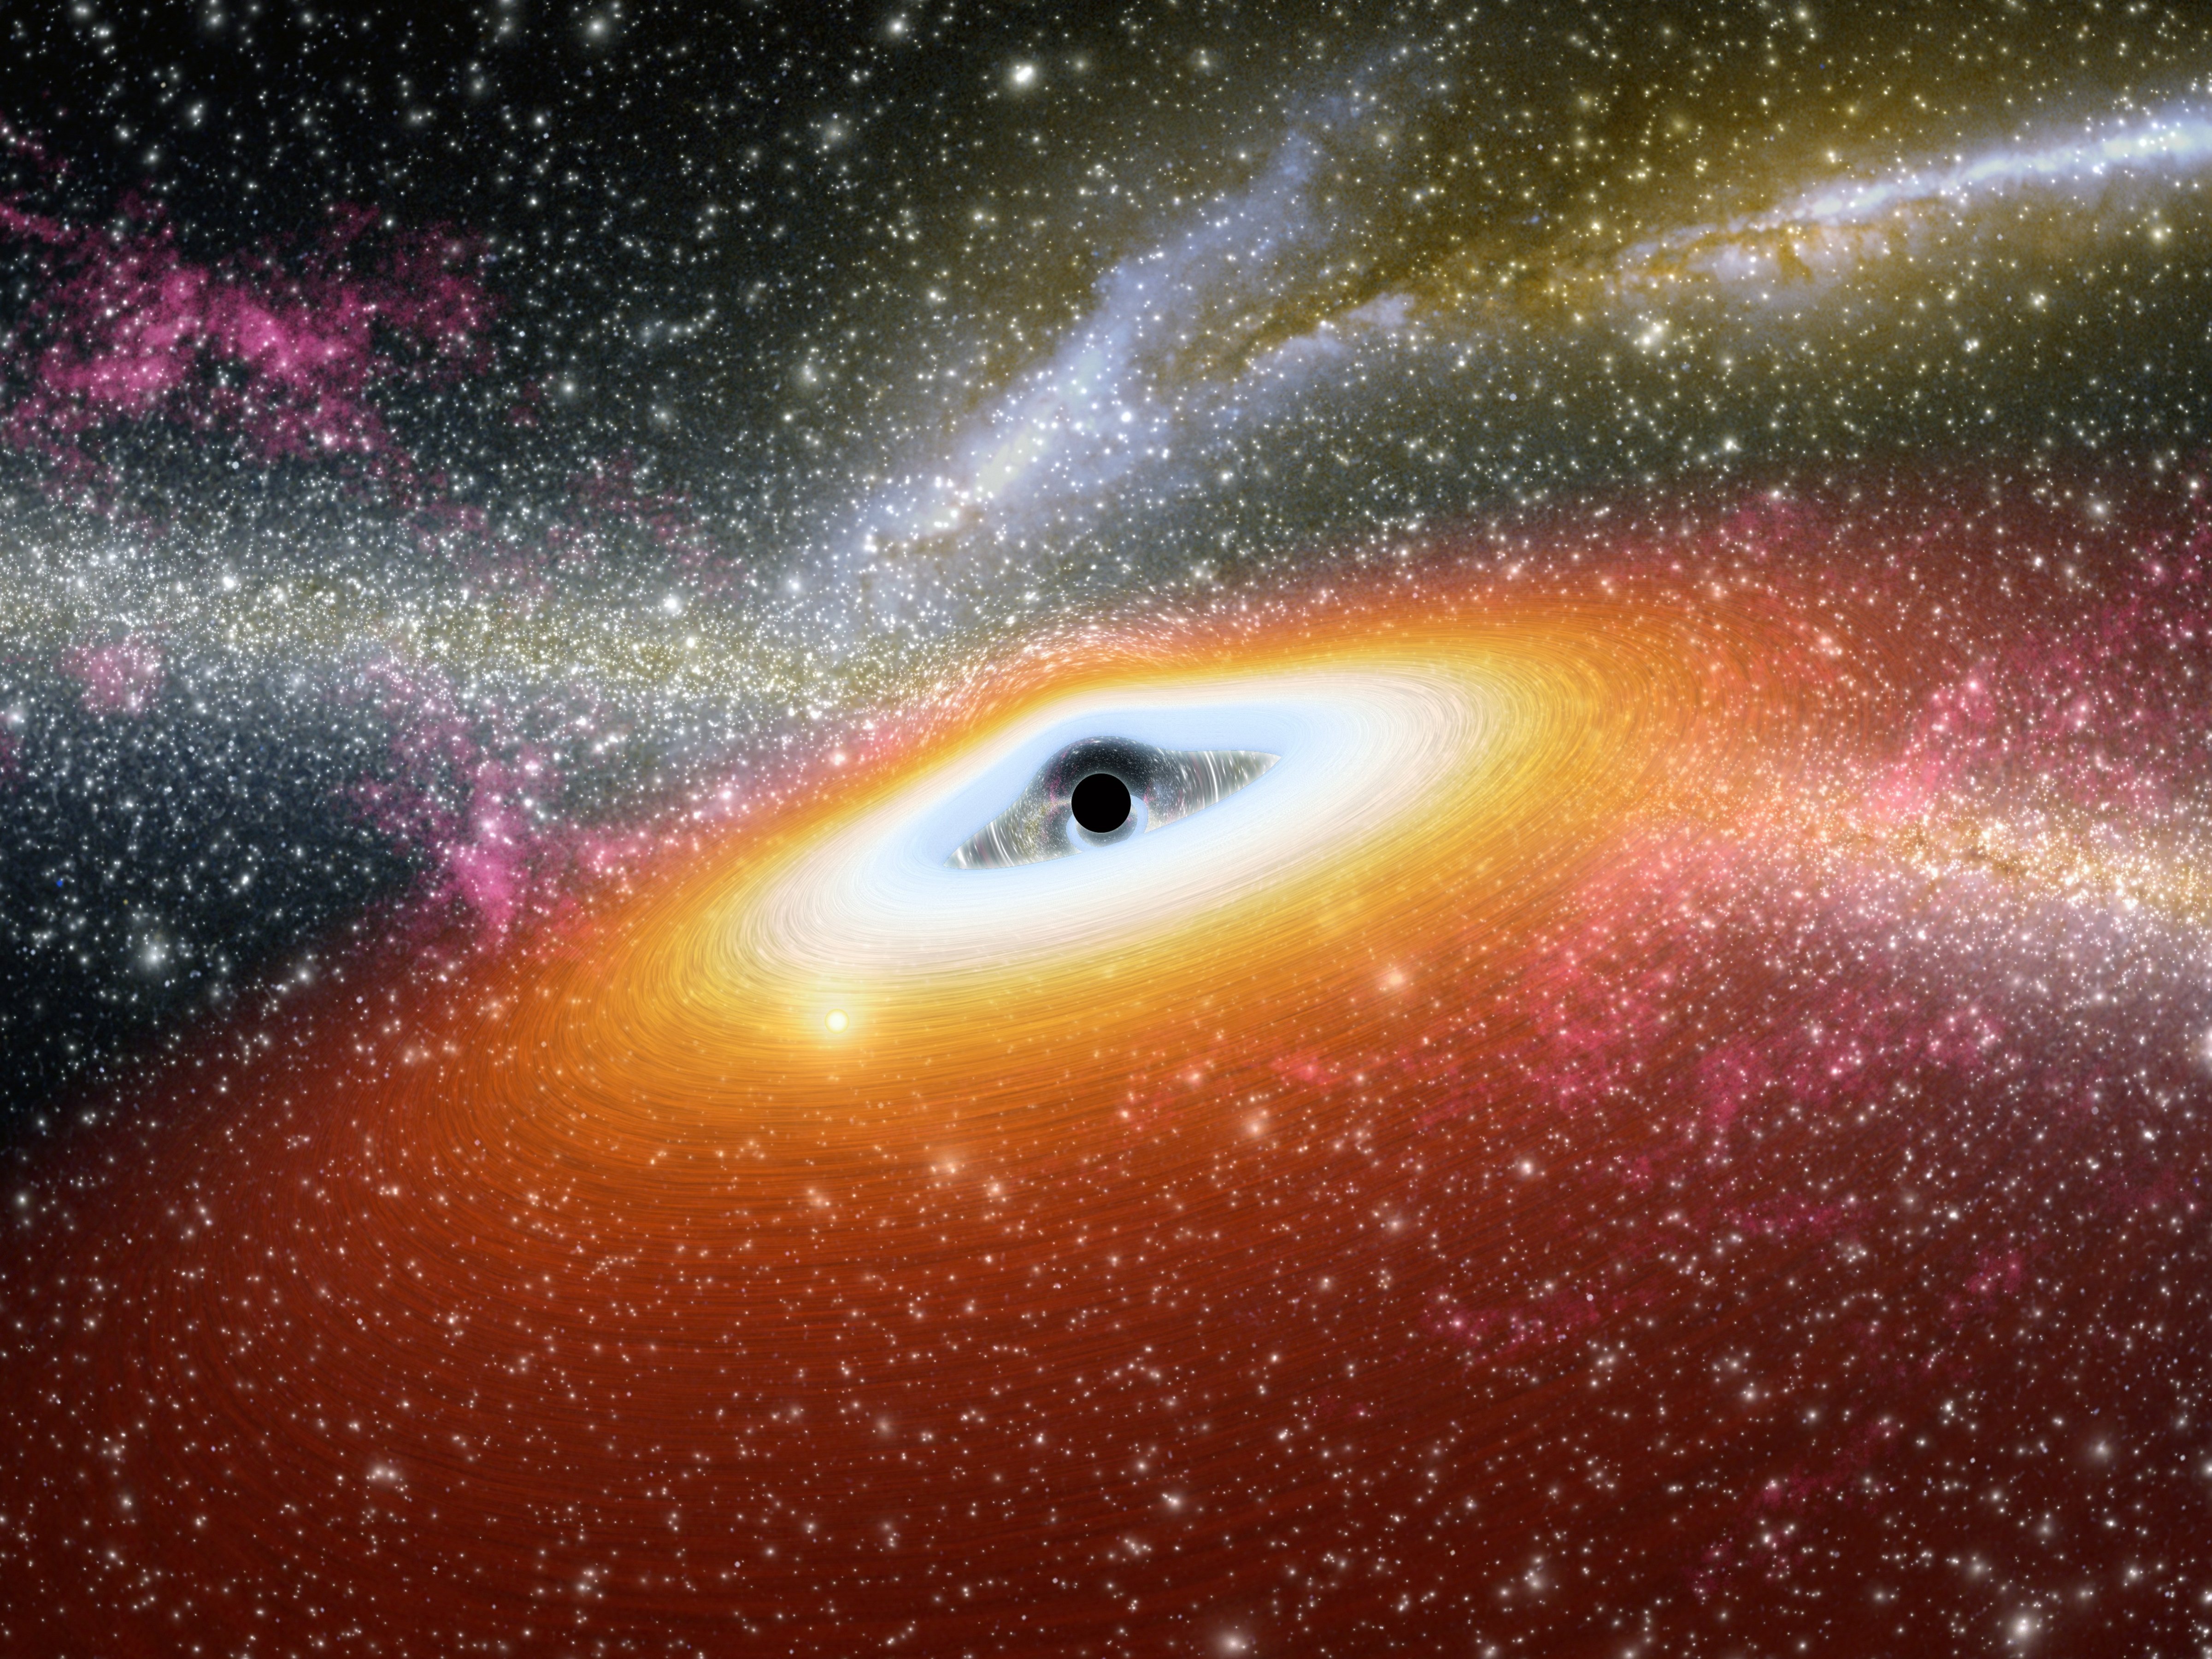 No escape: Artist's conception of a supermassive black hole at the core of a young, star-rich galaxy.